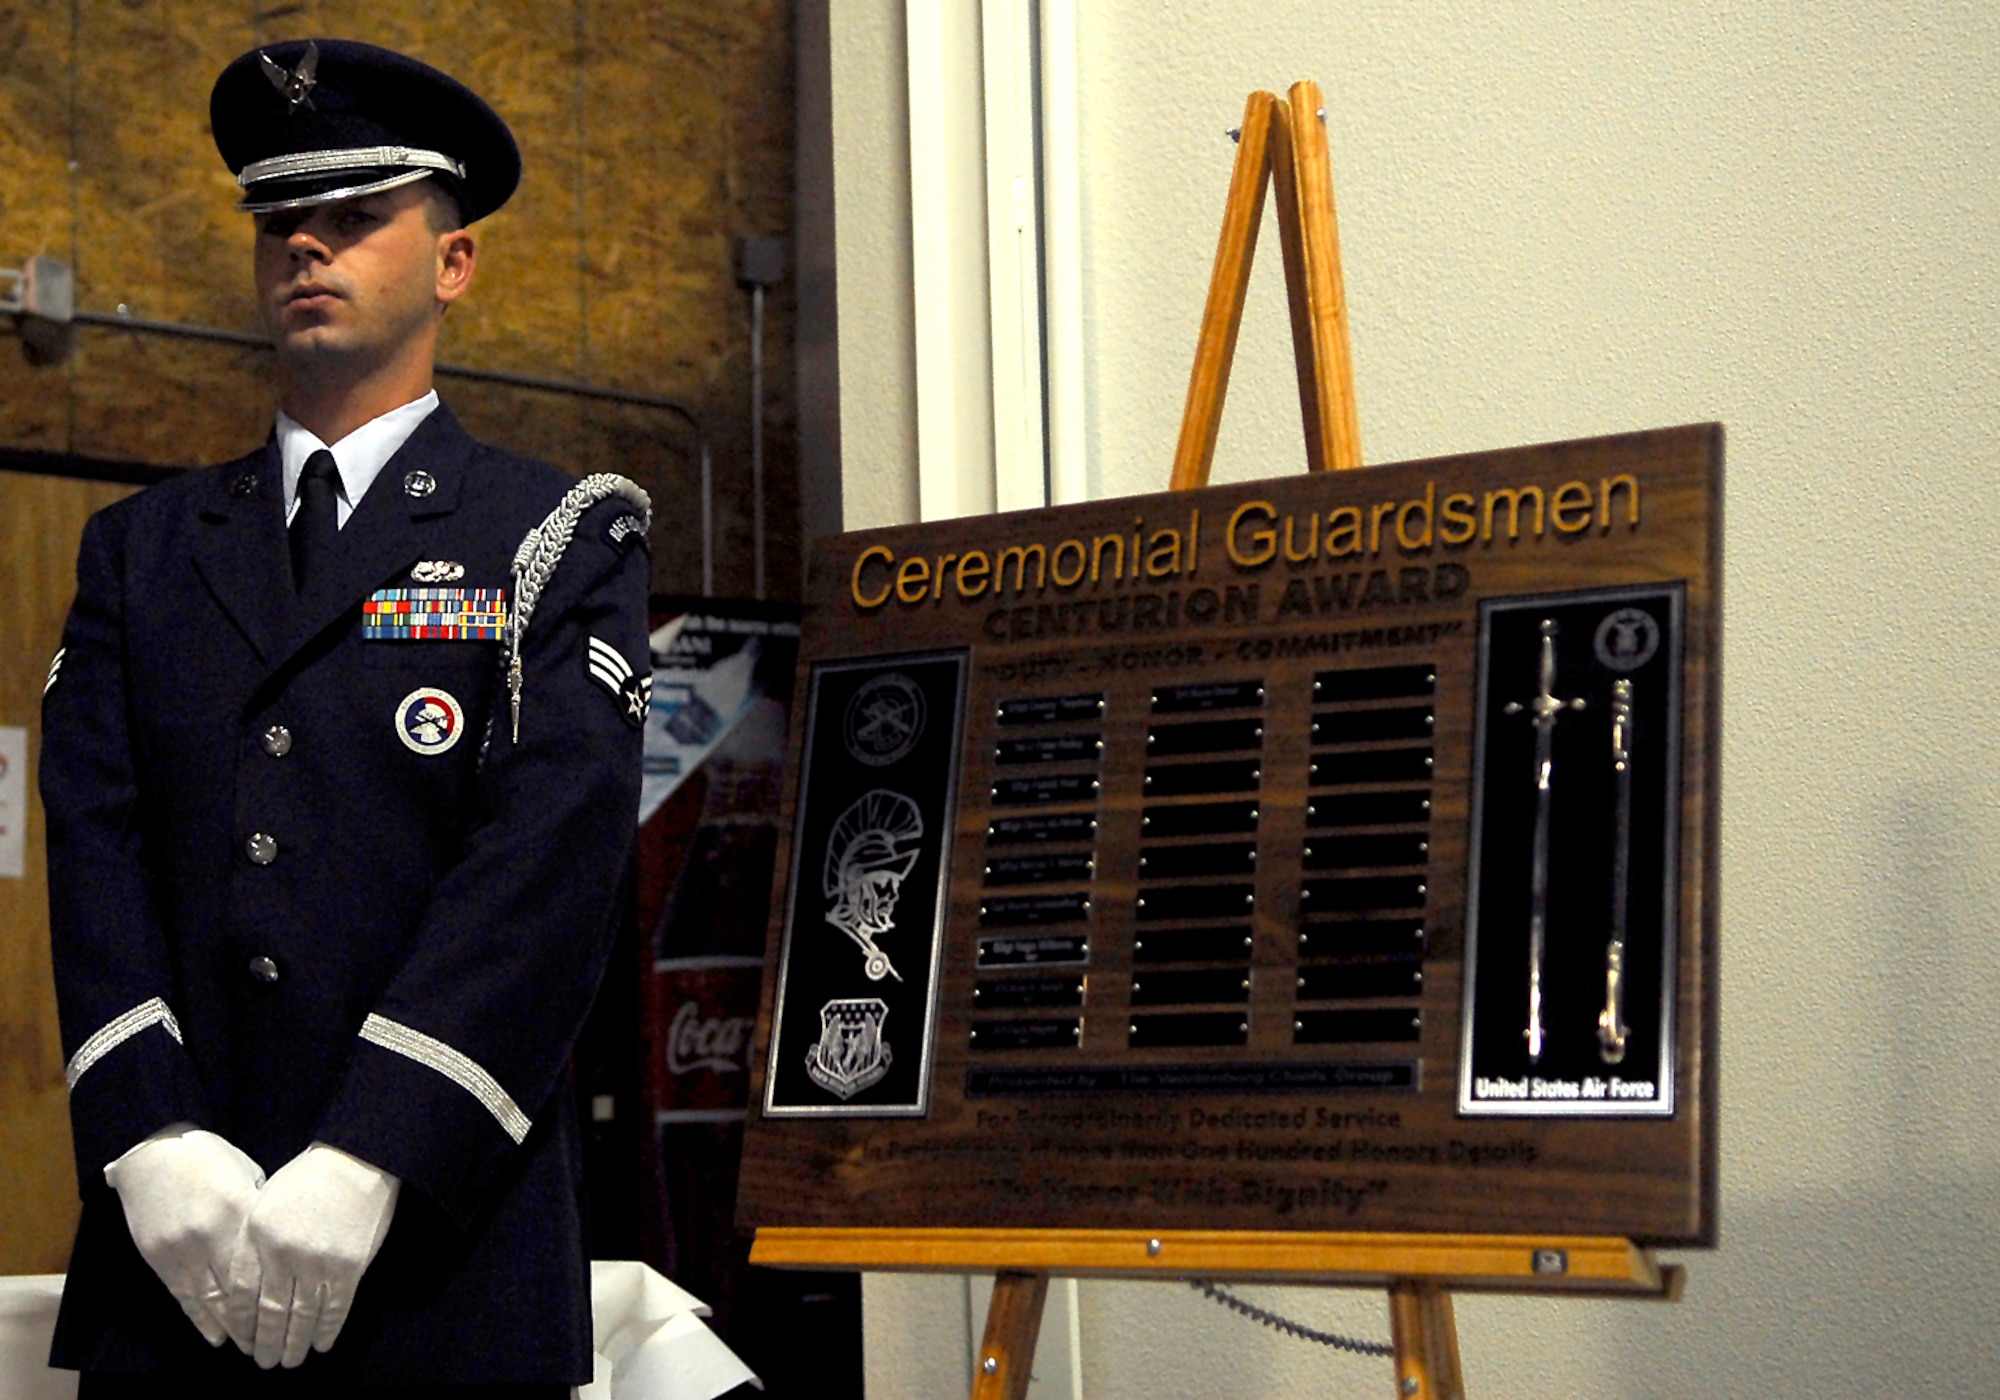 VANDENBERG AIR FORCE BASE, Calif. -- Senior Airman Shawn Hardee of the 30th Space Communication Squadron stands in as a proffer for the Centurion Award ceremony on Nov. 6. The Centurion Award is presented only to those who have accomplished at least 100 service details for the Vandenberg Honor Guard team. (U.S. Air Force photo / Airman First Class Ashley Reed)